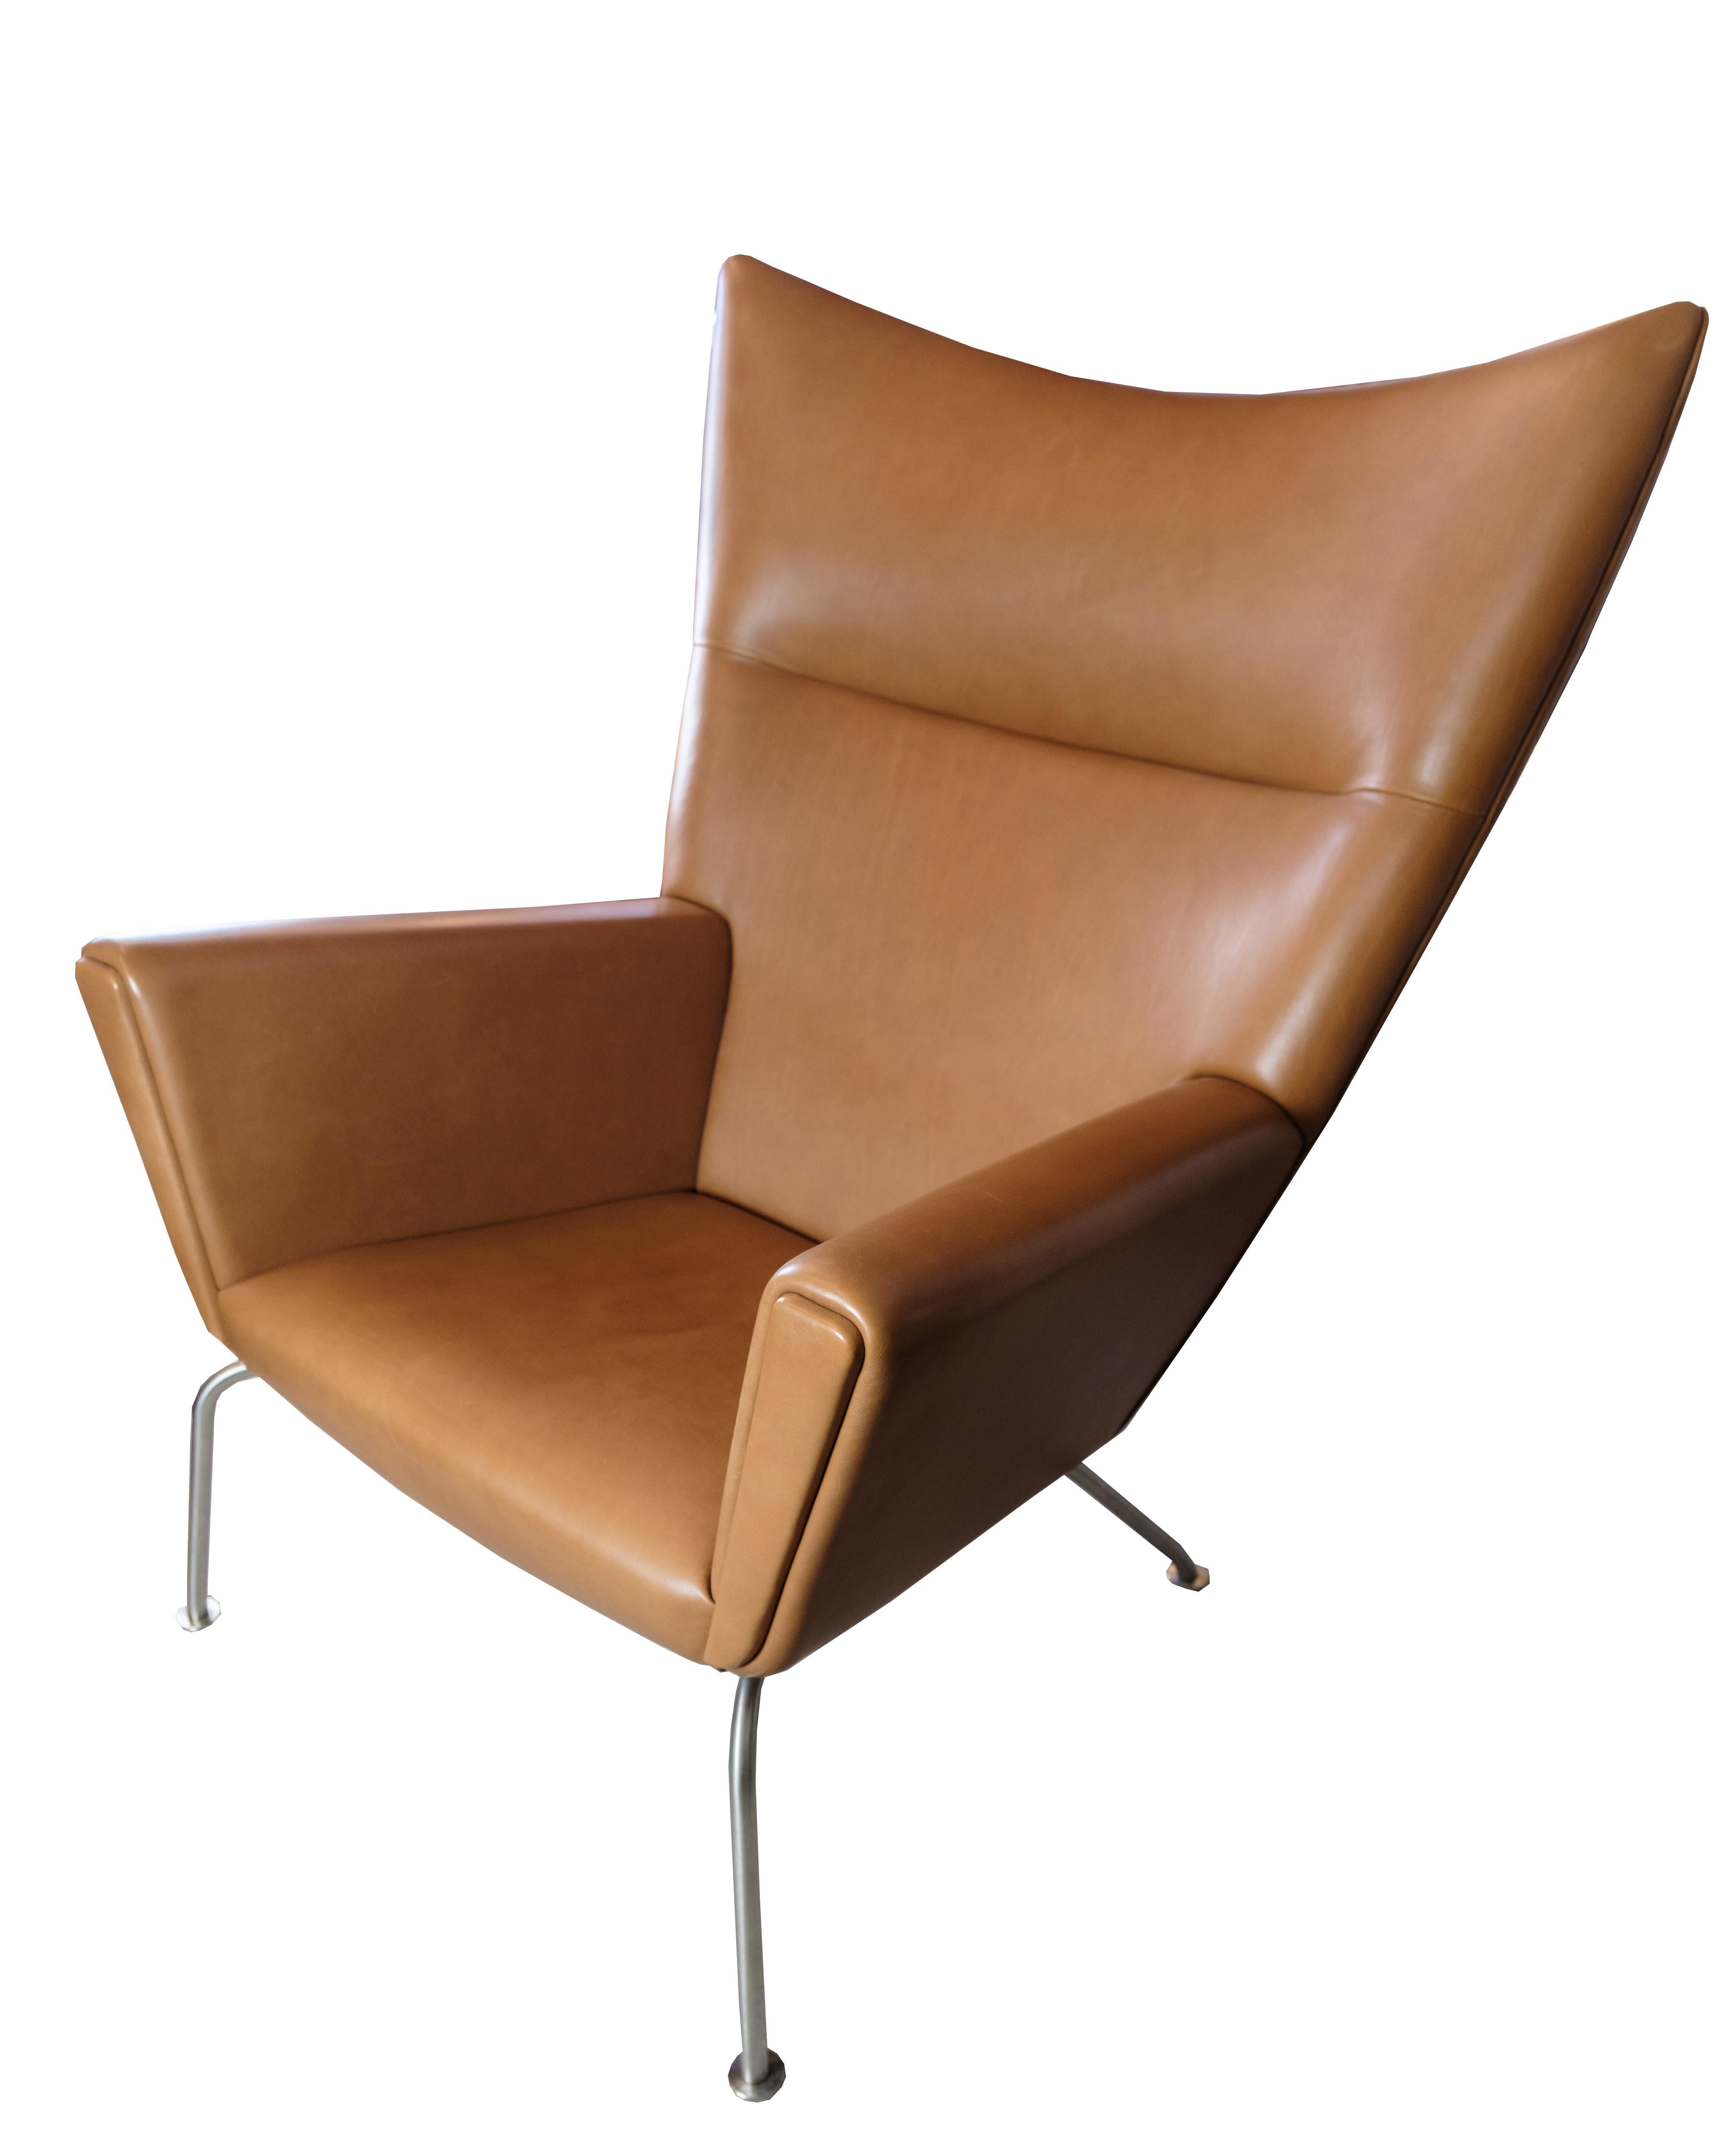 This armchair, known as Wingchair CH445, is a masterpiece of Danish design created by the renowned Hans J. Wegner in 1960 and produced by Carl Hansen & Søn. The chair is an icon in modern furniture design with its distinctive wing-shaped backrest